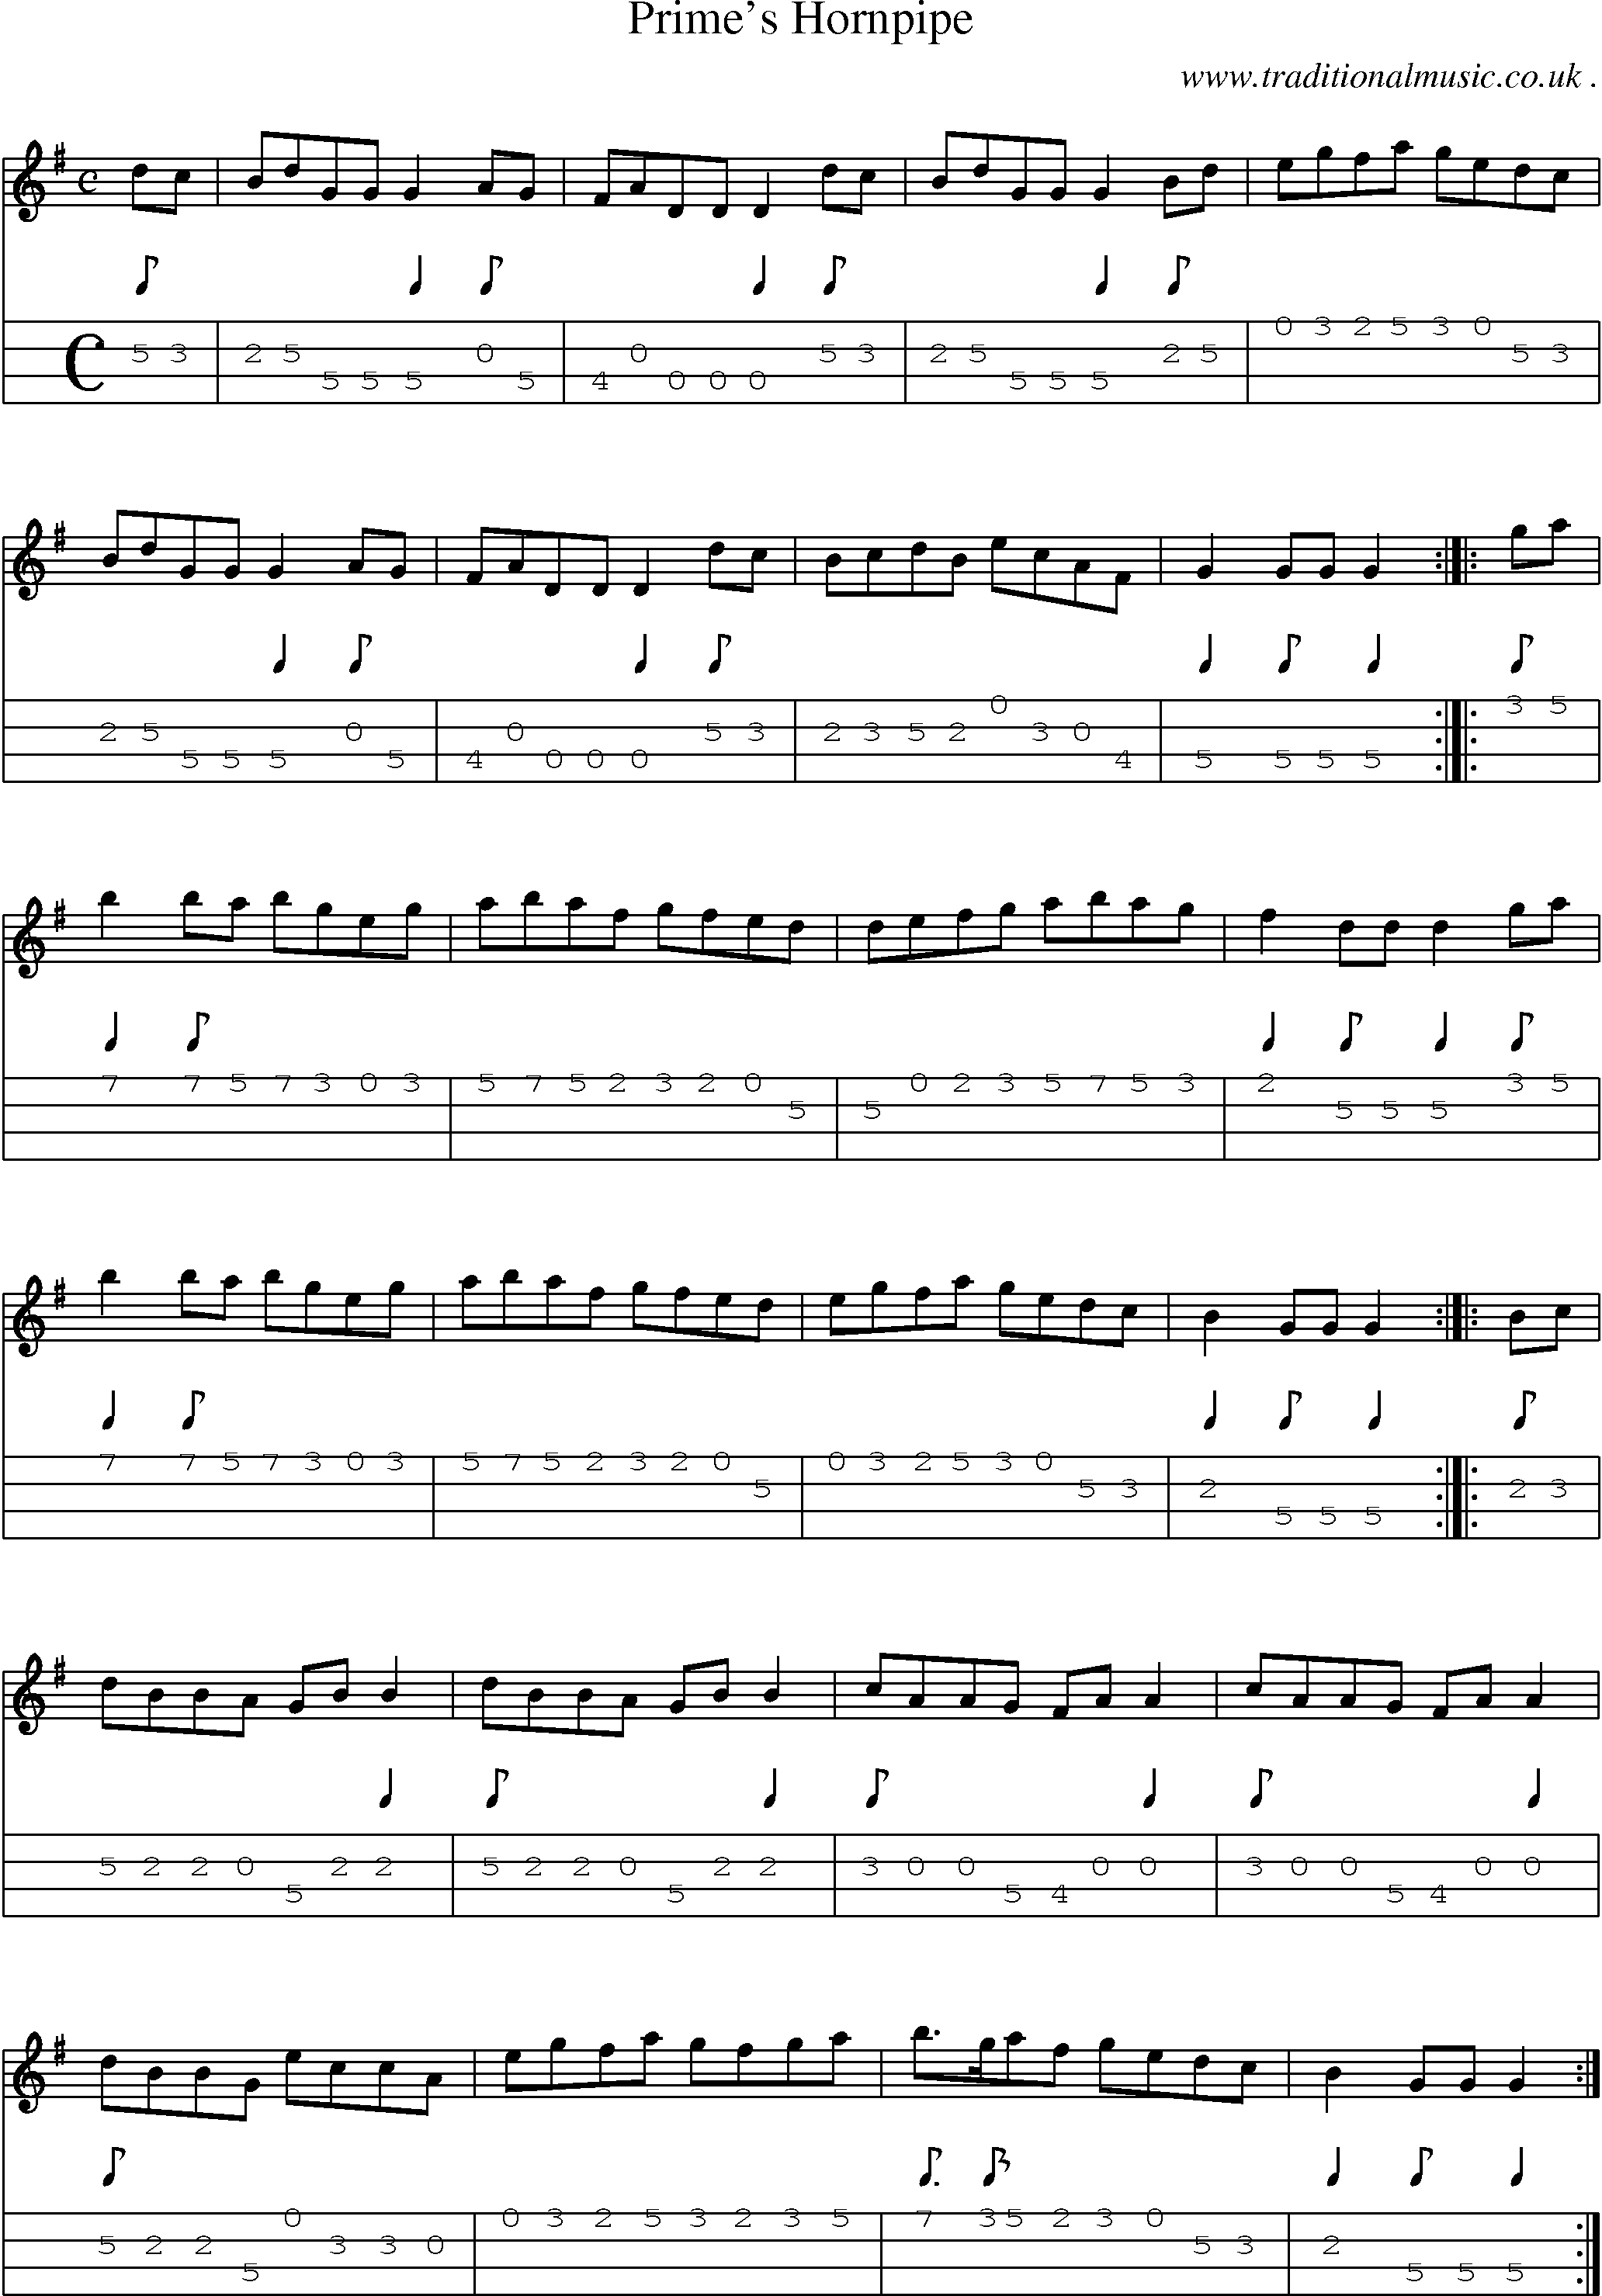 Sheet-Music and Mandolin Tabs for Primes Hornpipe